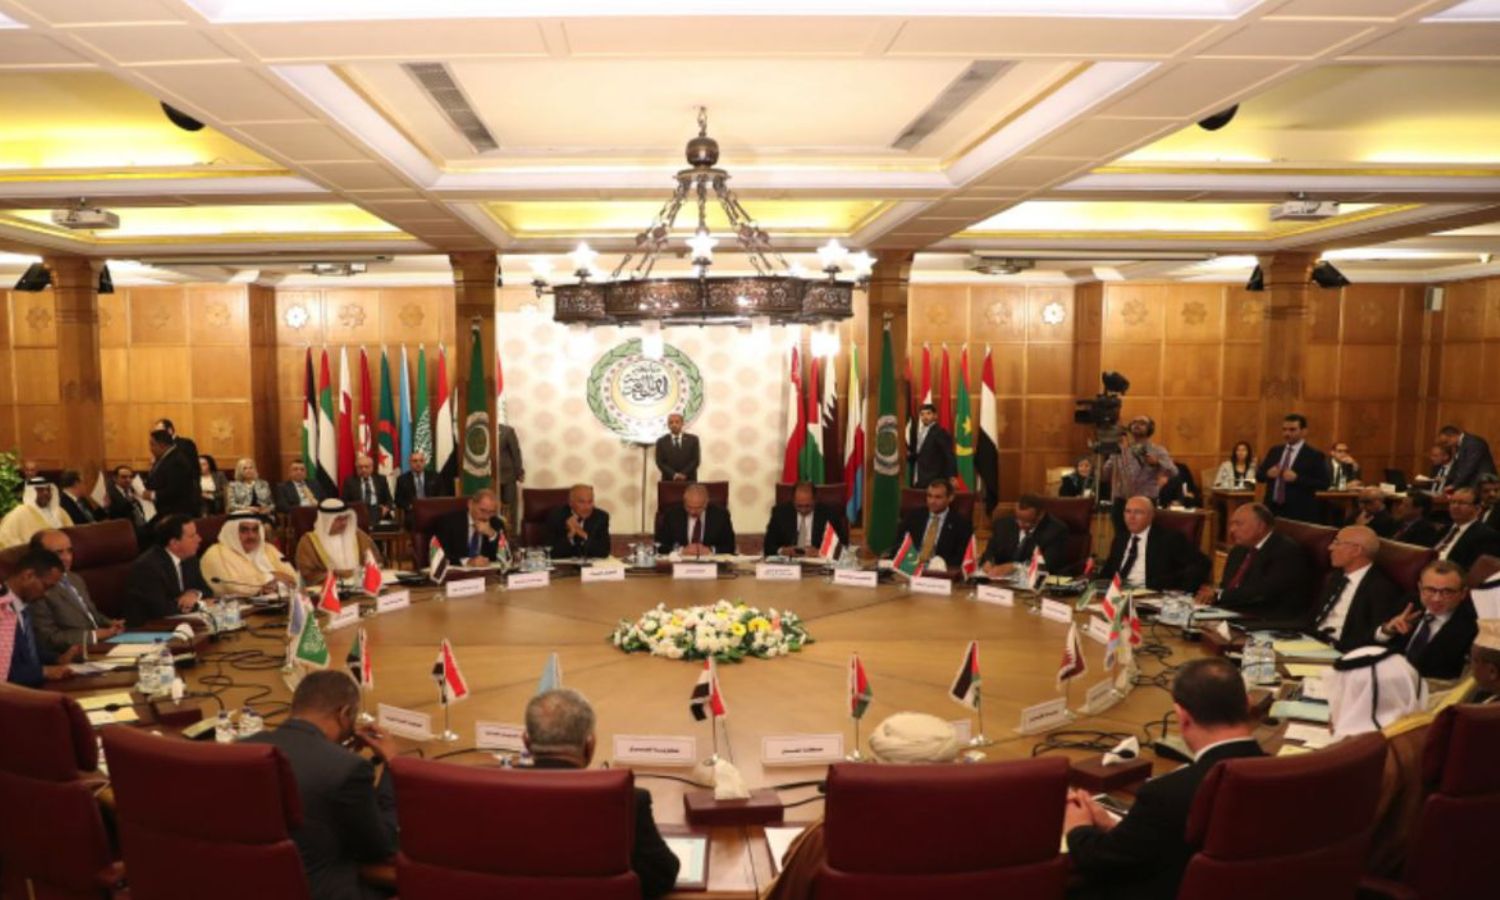 Representatives of the League of Arab States (LAS) attending an emergency meeting on Syria - 12 October 2019 (AFP)